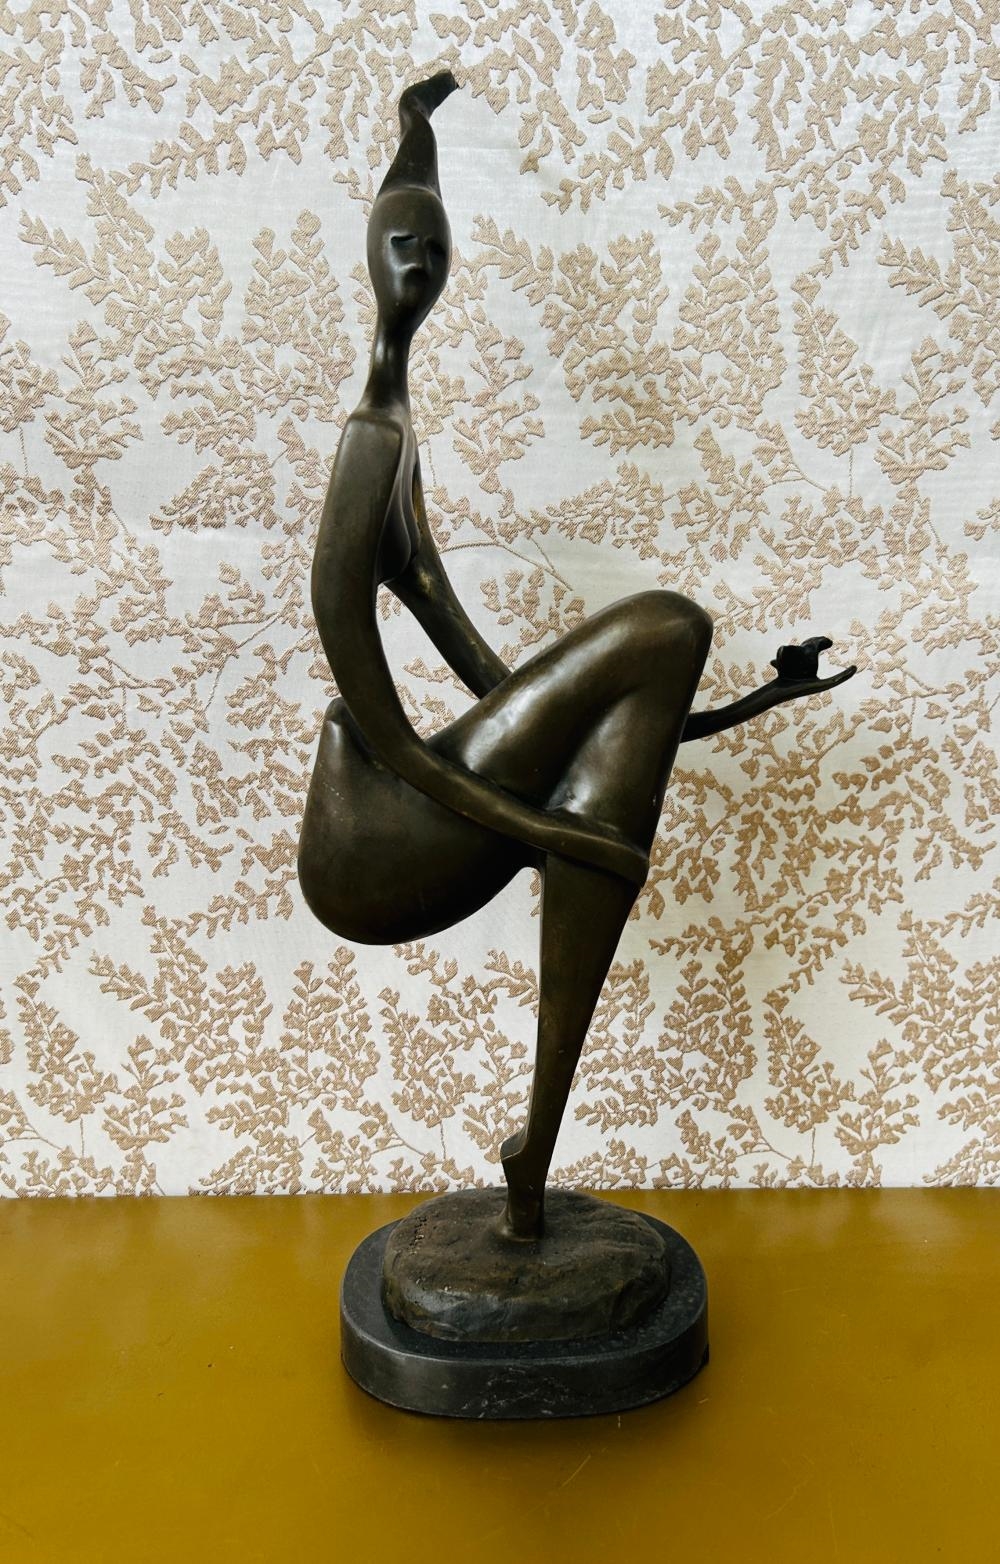 After Pable Picasso Inspired Bronze Sculpture on Marble Base. Signed. Measures: 62cm x 20cm x 14cm by Pablo Picasso